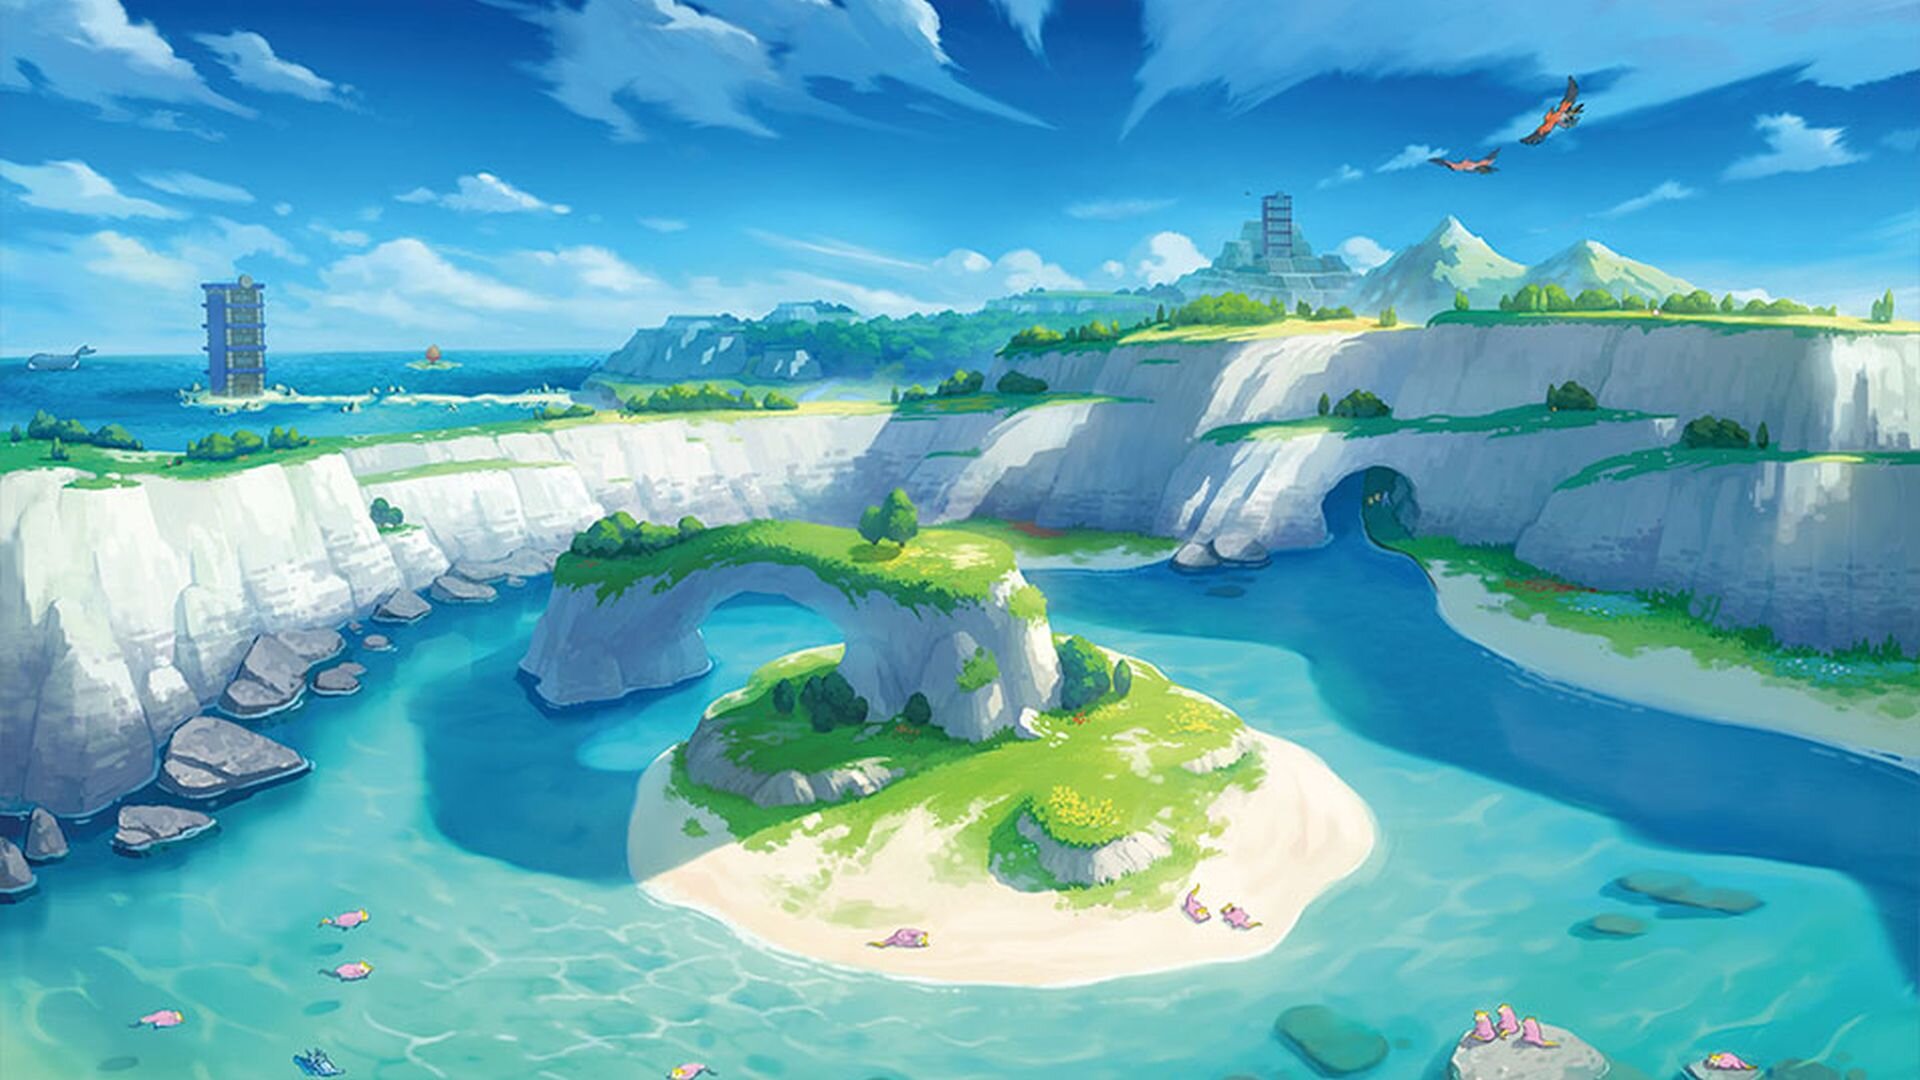 Pokemon Sword And Shield: Isle of Armor Vs Crown Tundra - Which